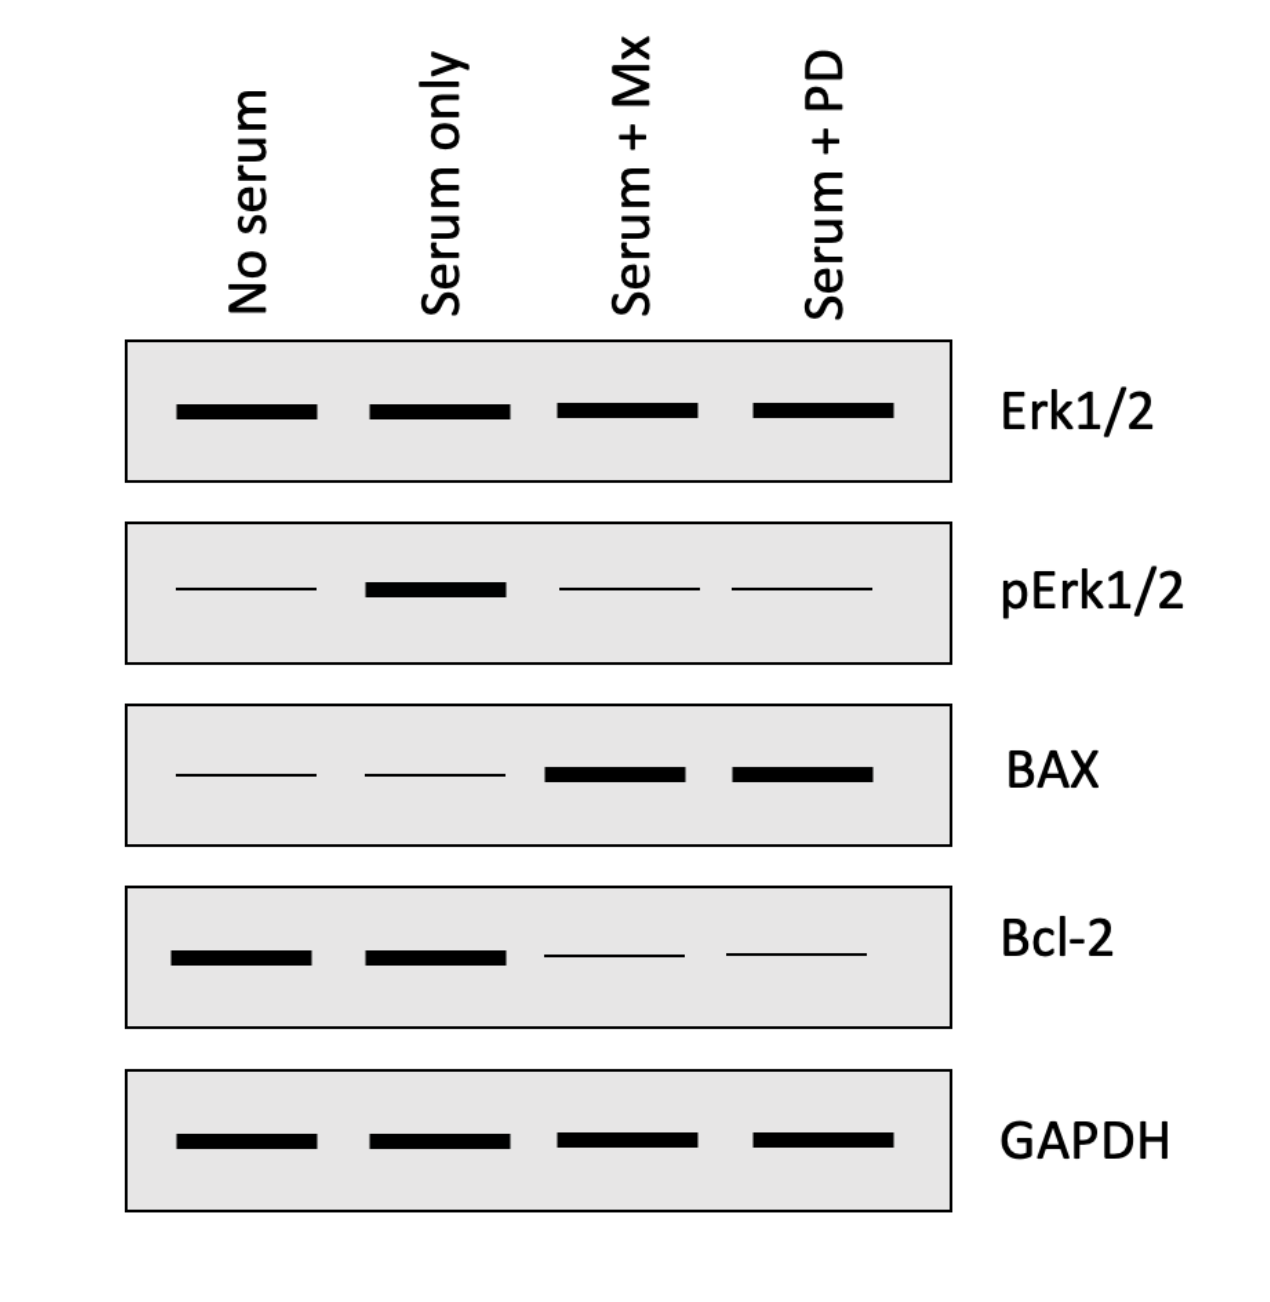 <p>The following four questions refer to the Western blot below that investigated how a chemotherapeutic drug methotrexate (Mx) impacts the activation of the ERK1/2 and apoptosis pathways in HeLa cells (malignant cervical cancer cells).  Cells were either serum starved (no serum) or grown in serum containing media with or without PD184352 (PD; ERK1/2 inhibitor) or Mx.</p><p></p><p>Based on what we saw in class, if you had run a western blot to detect <strong>CREB</strong>, in which of the lanes would you have expected to see a thick/intense band?  One or more may be correct, so select all that apply:</p><ol><li><p>Choice 1 of 4:Serum only</p></li><li><p>Choice 2 of 4:Serum + PD</p></li><li><p>Choice 3 of 4:Serum + Mx</p></li><li><p>Choice 4 of 4:No serum</p></li></ol>